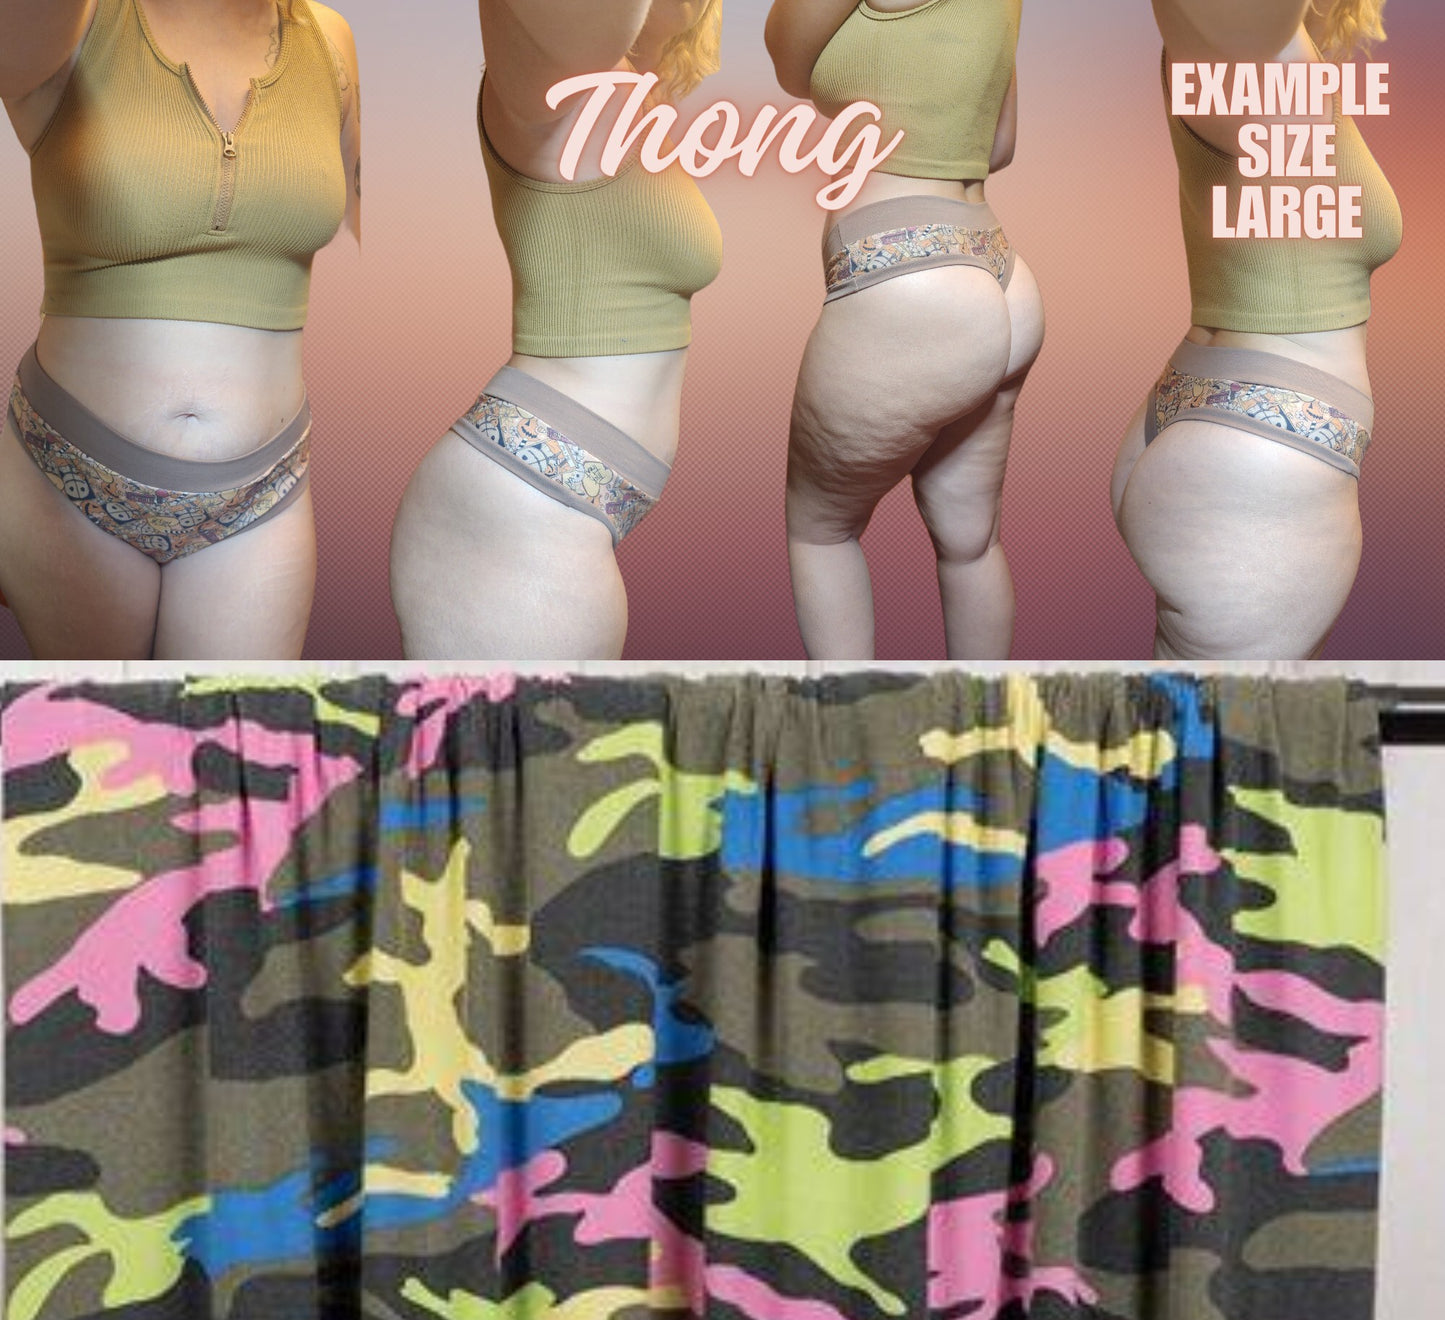 Camo, Tie Dye x6 Prints | Thondlewear, Thongs for every body | Elastic/Knit Bands